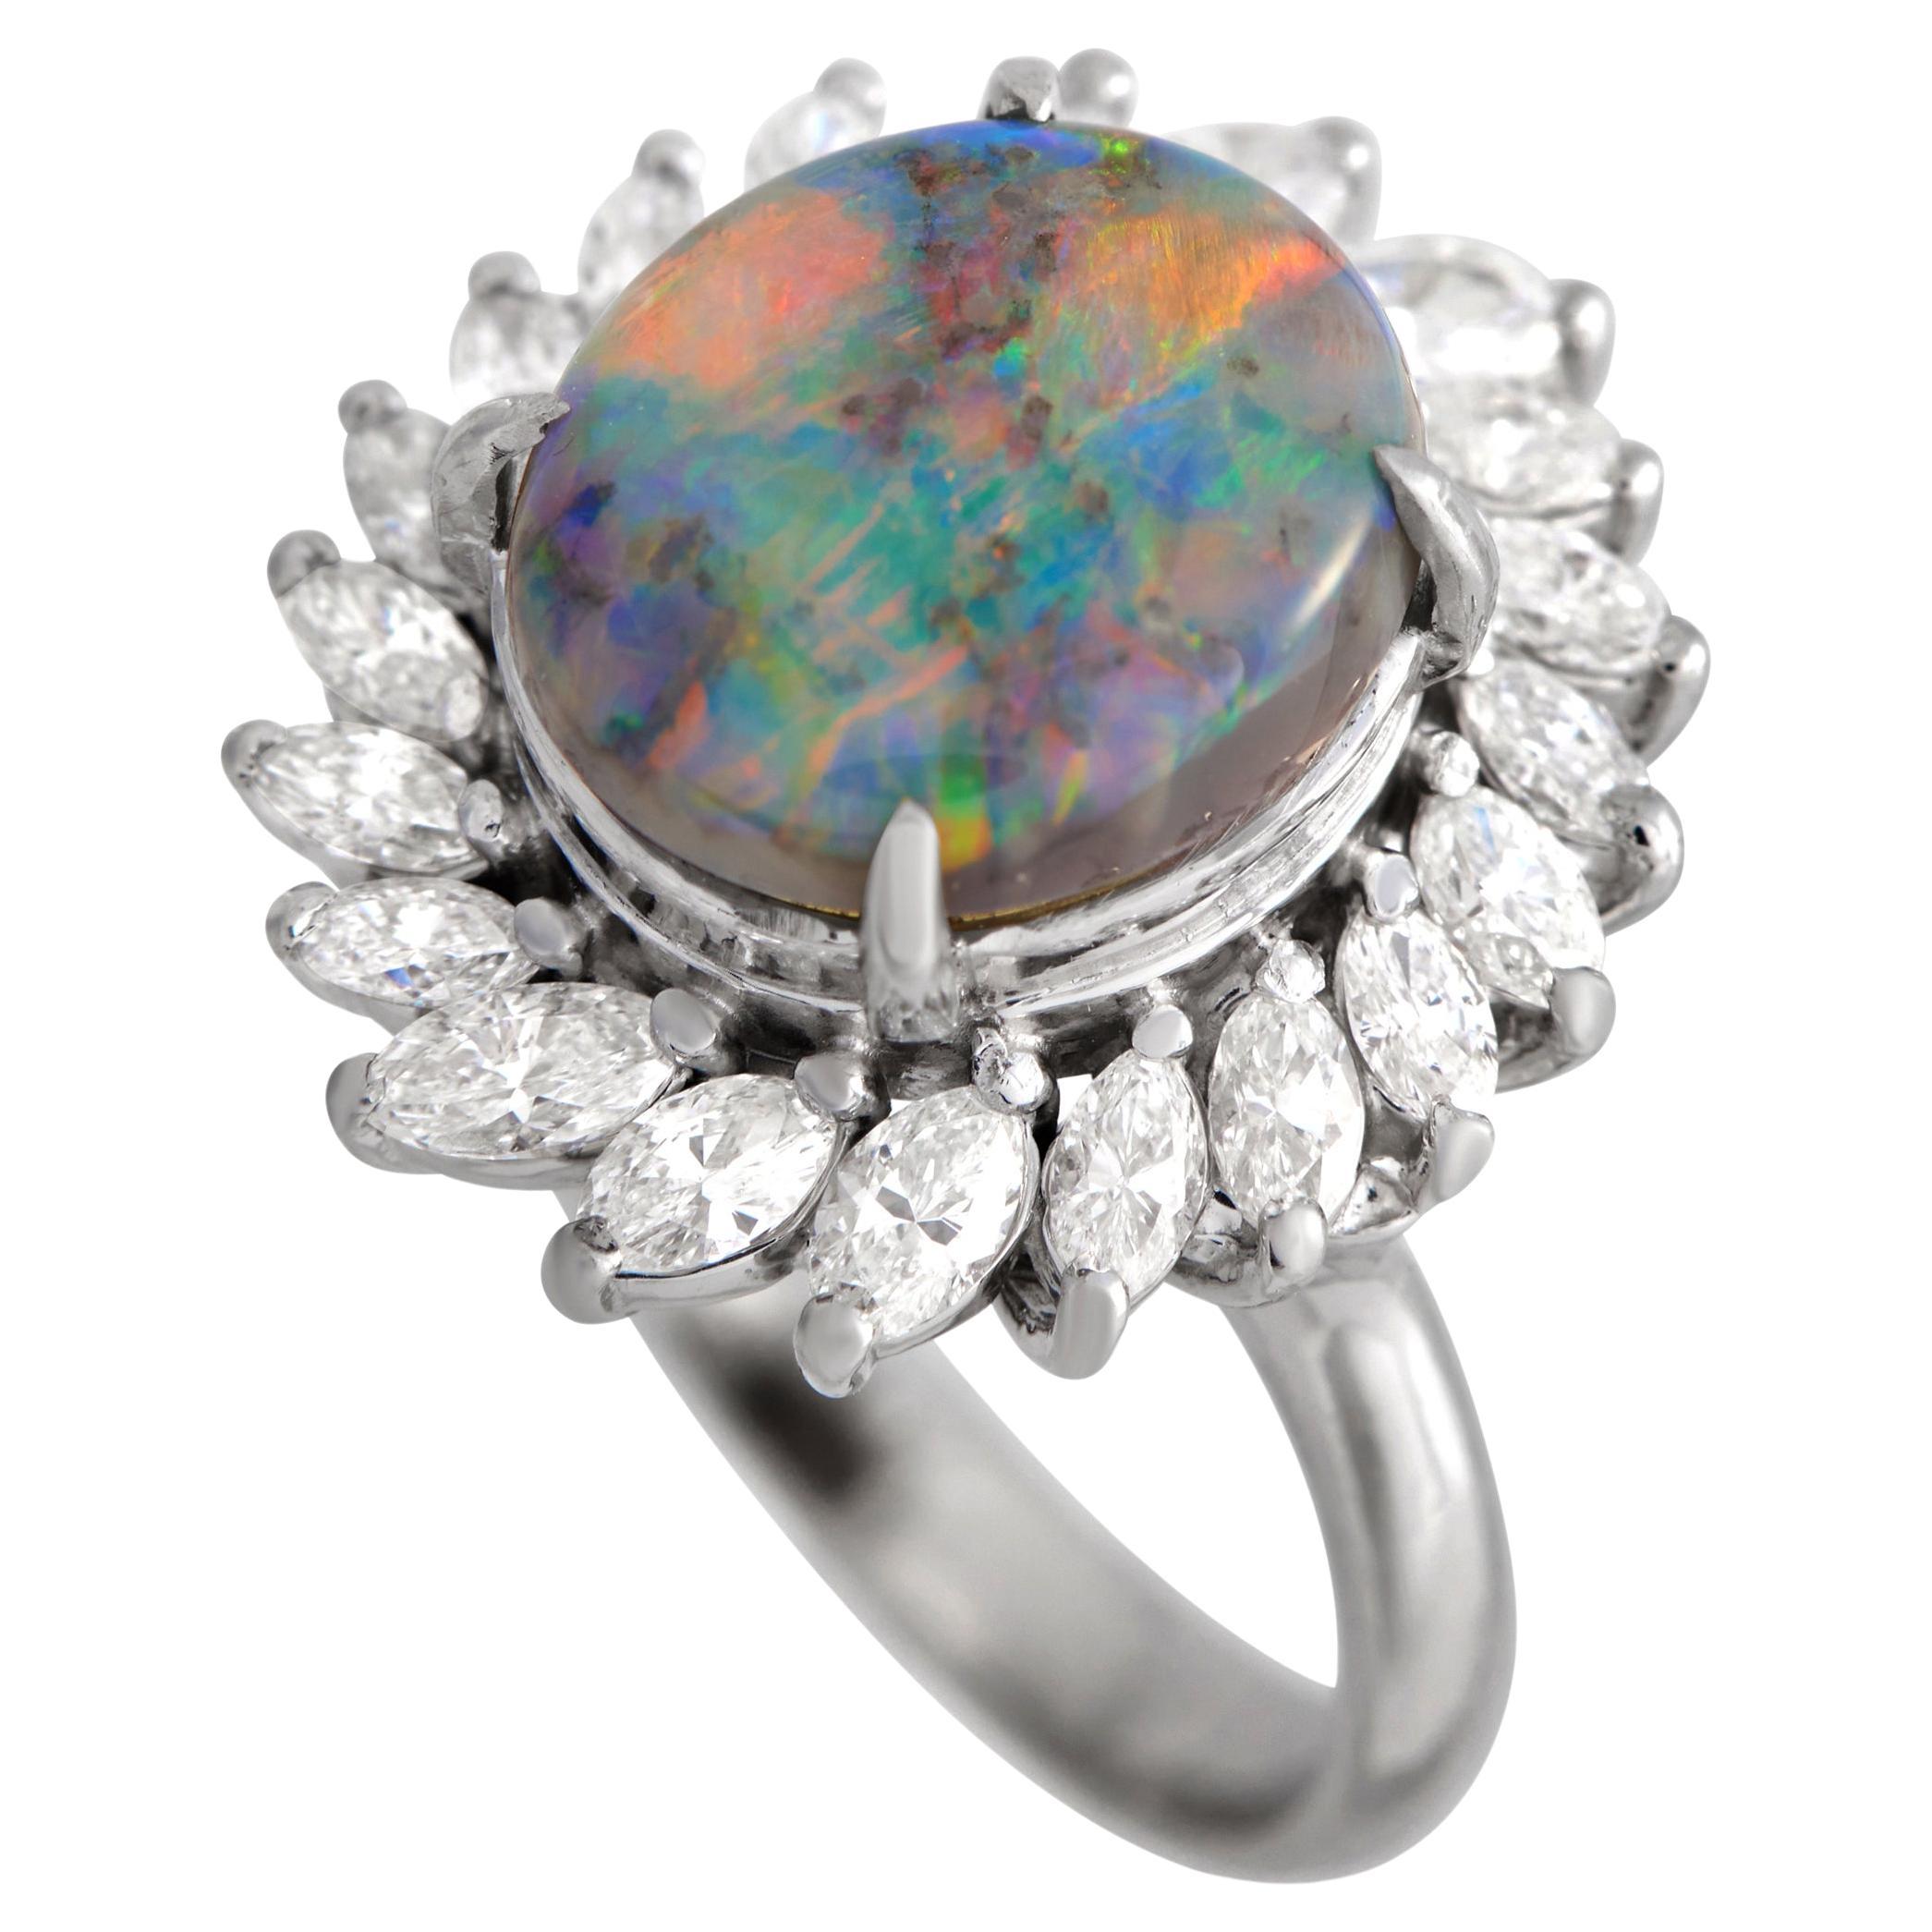 LB Exclusive Platinum 0.80ct Diamond and Opal Ring MF28-101123 For Sale